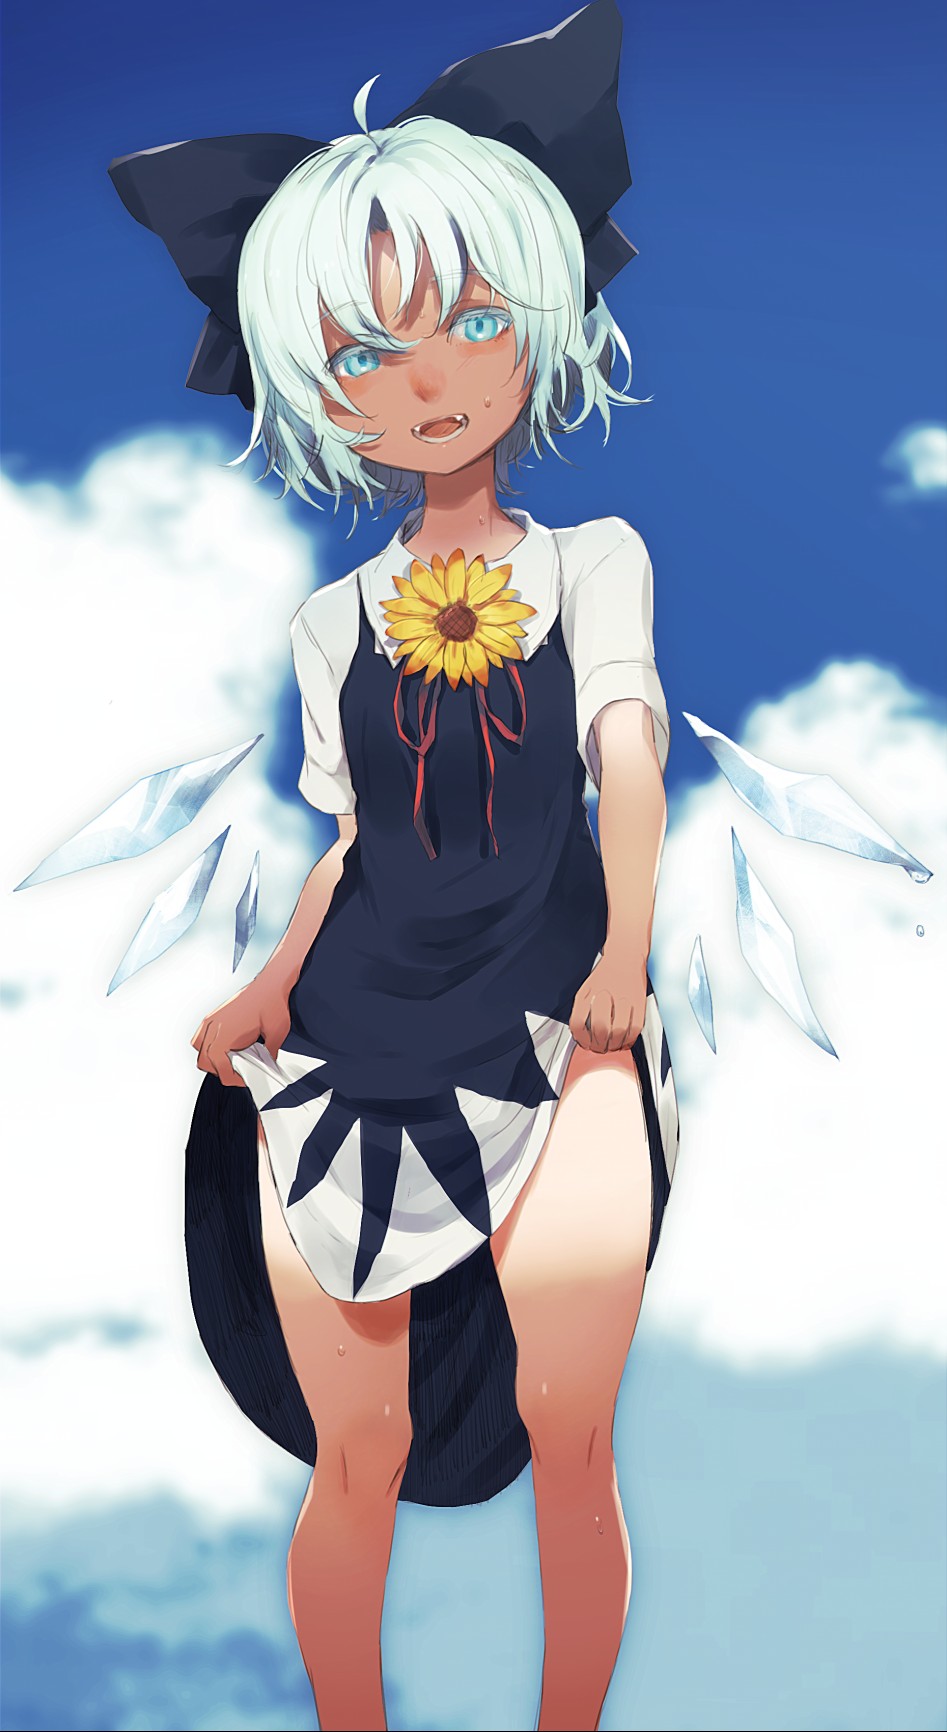 cirno (hidden star in four seasons and touhou) drawn by migihidari (puwako) - dcf2639a05a4f9566a559a134950e133.png